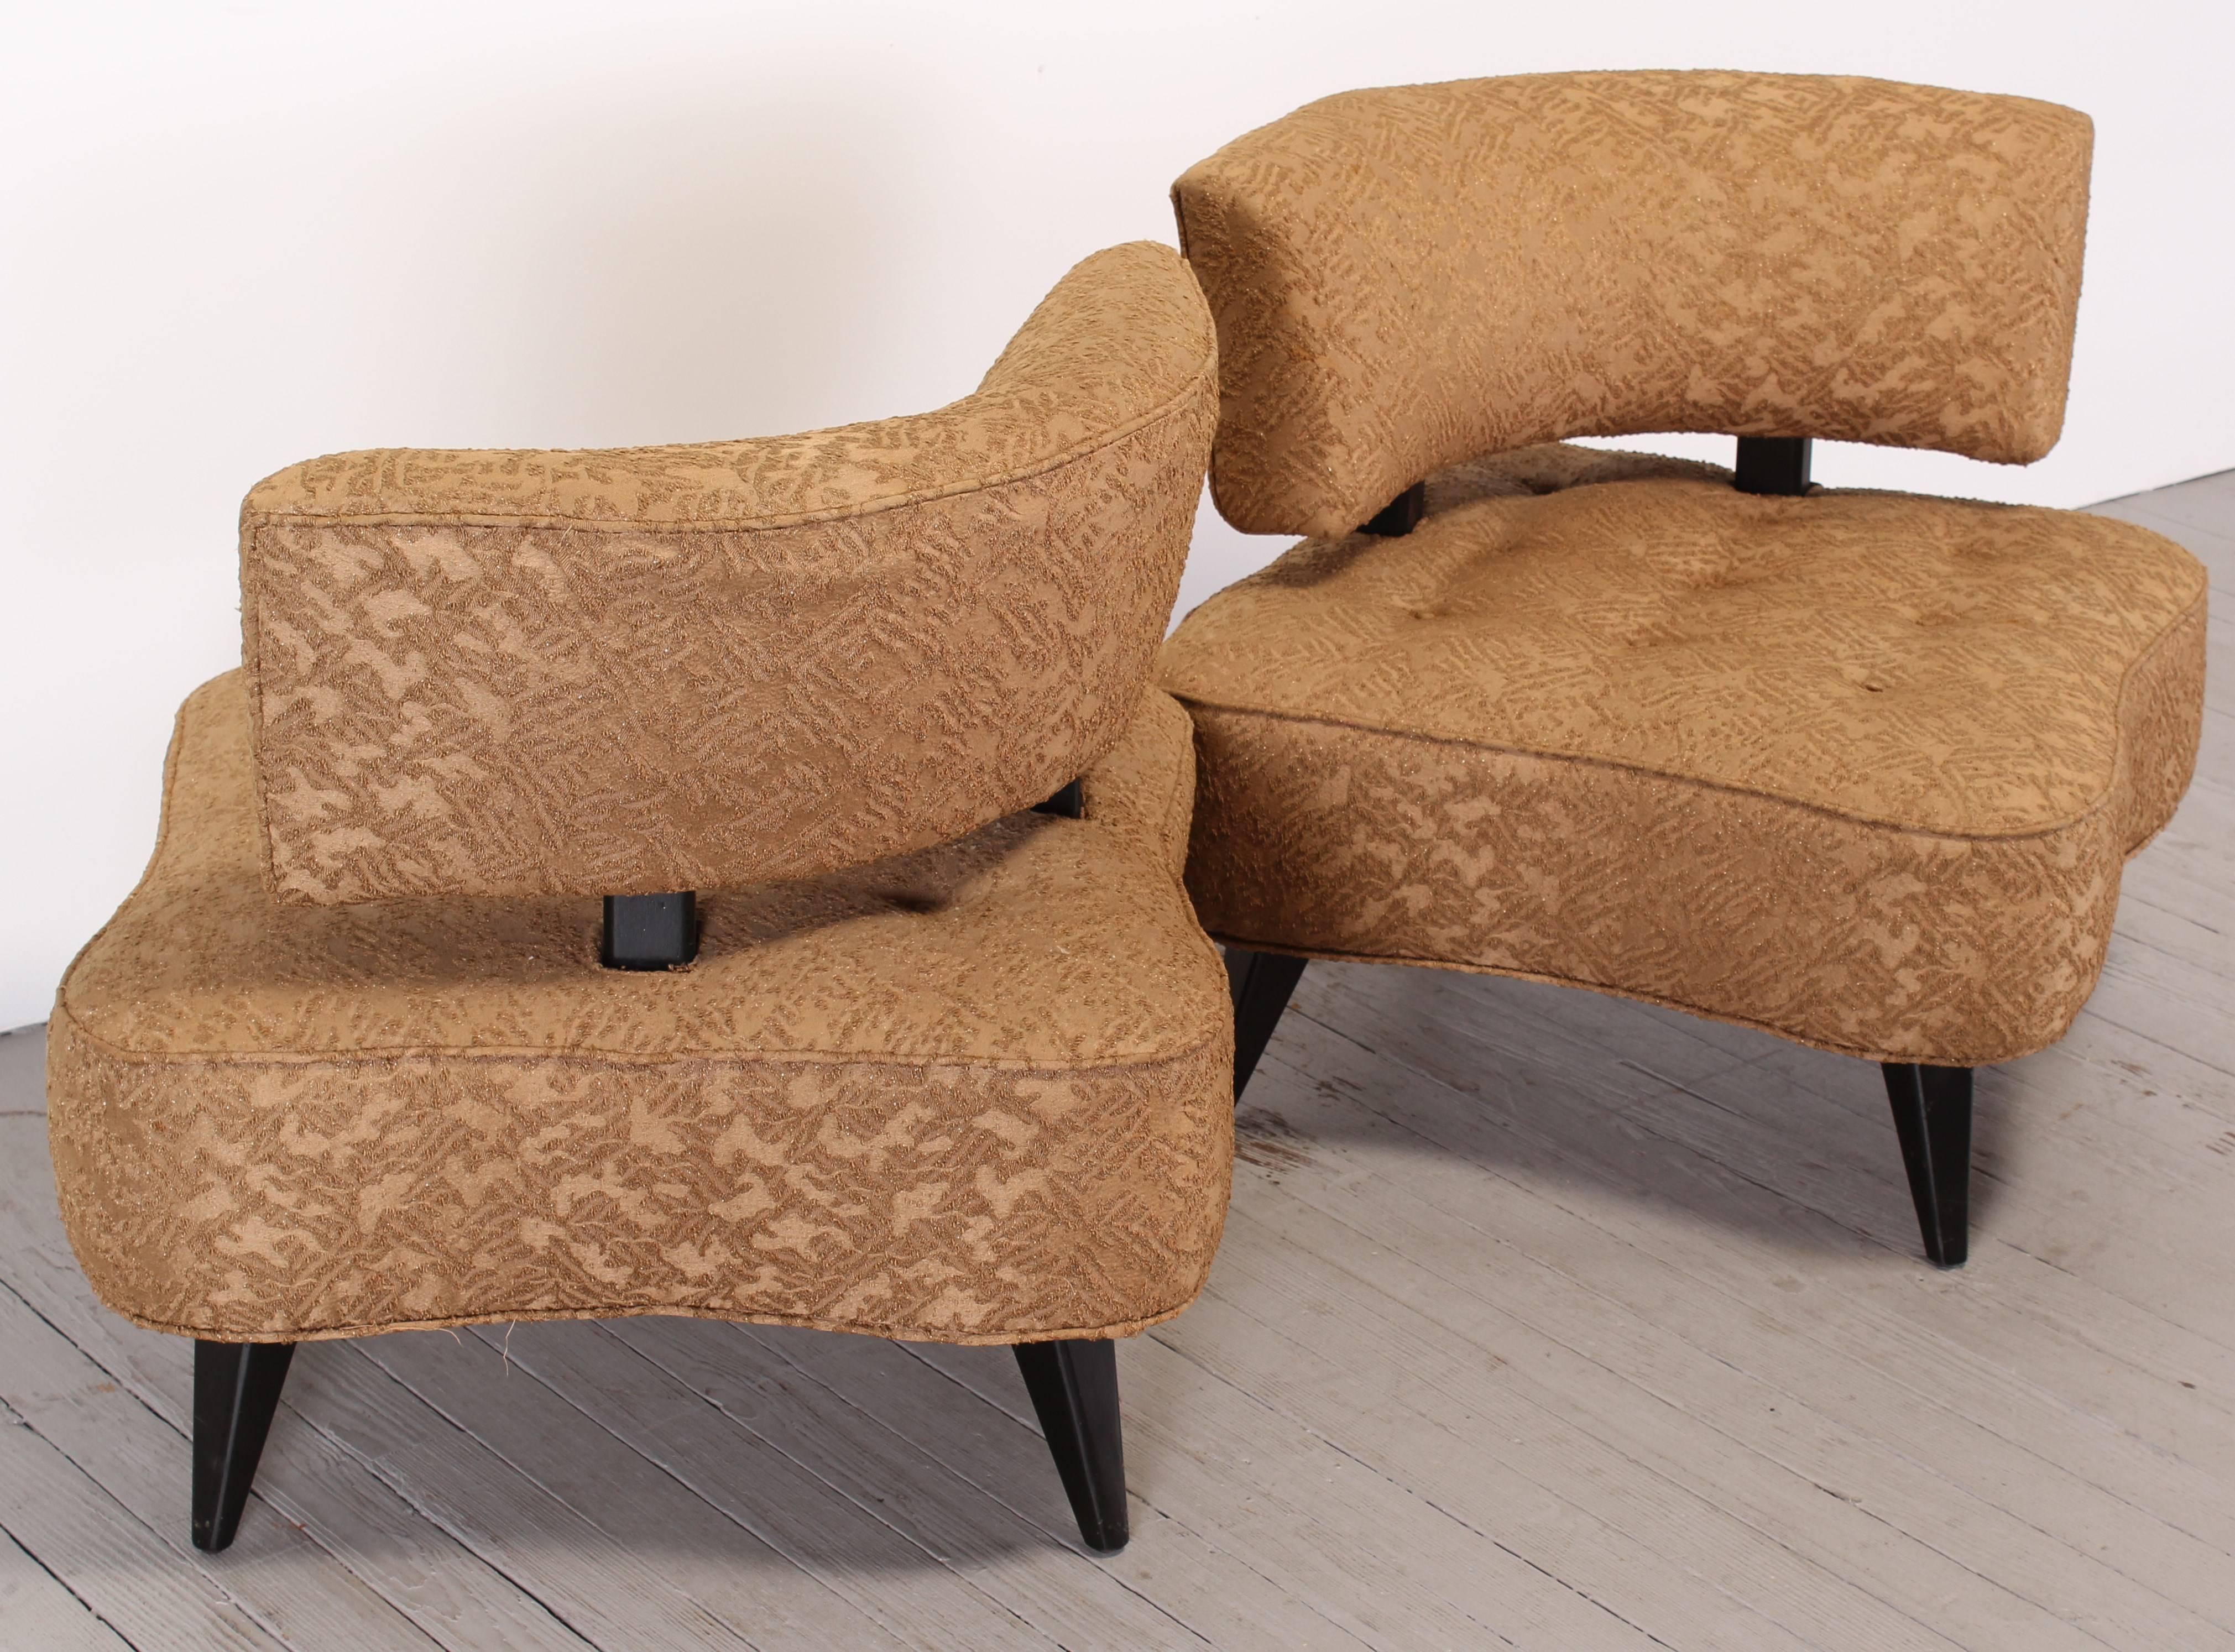 A very unique sculptural pair of James Mont style chairs, 1940. Dimensions found below. Seat depth varies depending on angle you are sitting in them which is 22